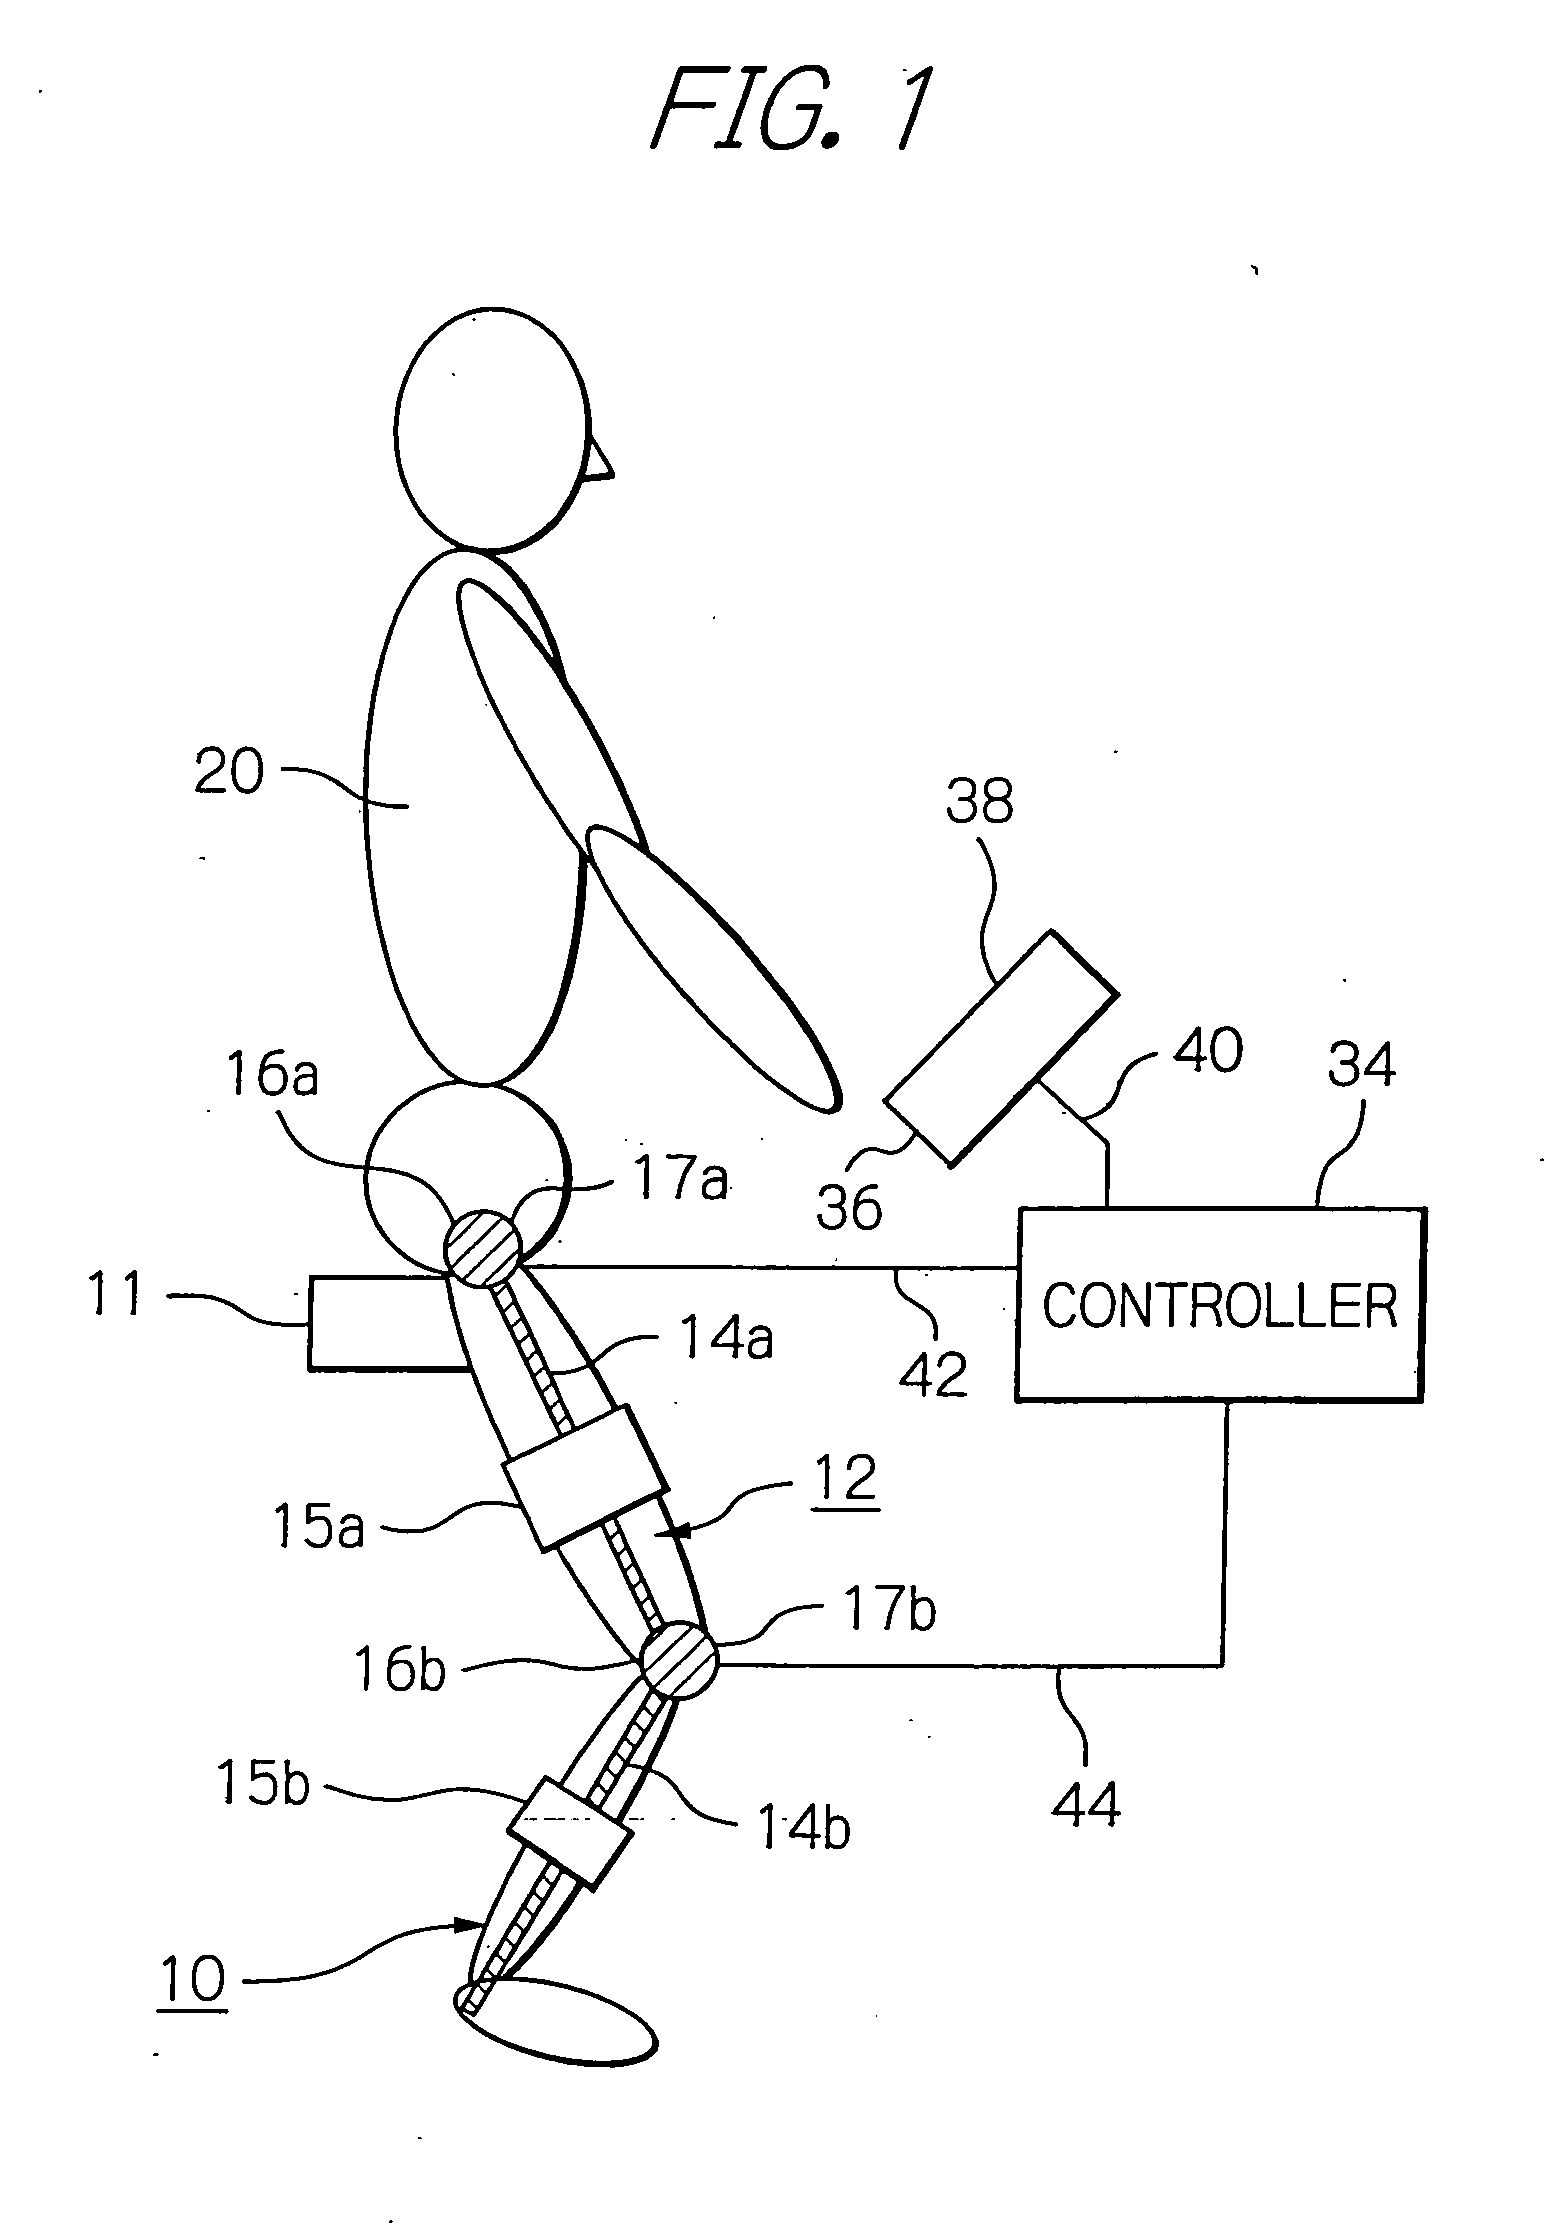 Resistance training device exerting a constant load without depending upon position